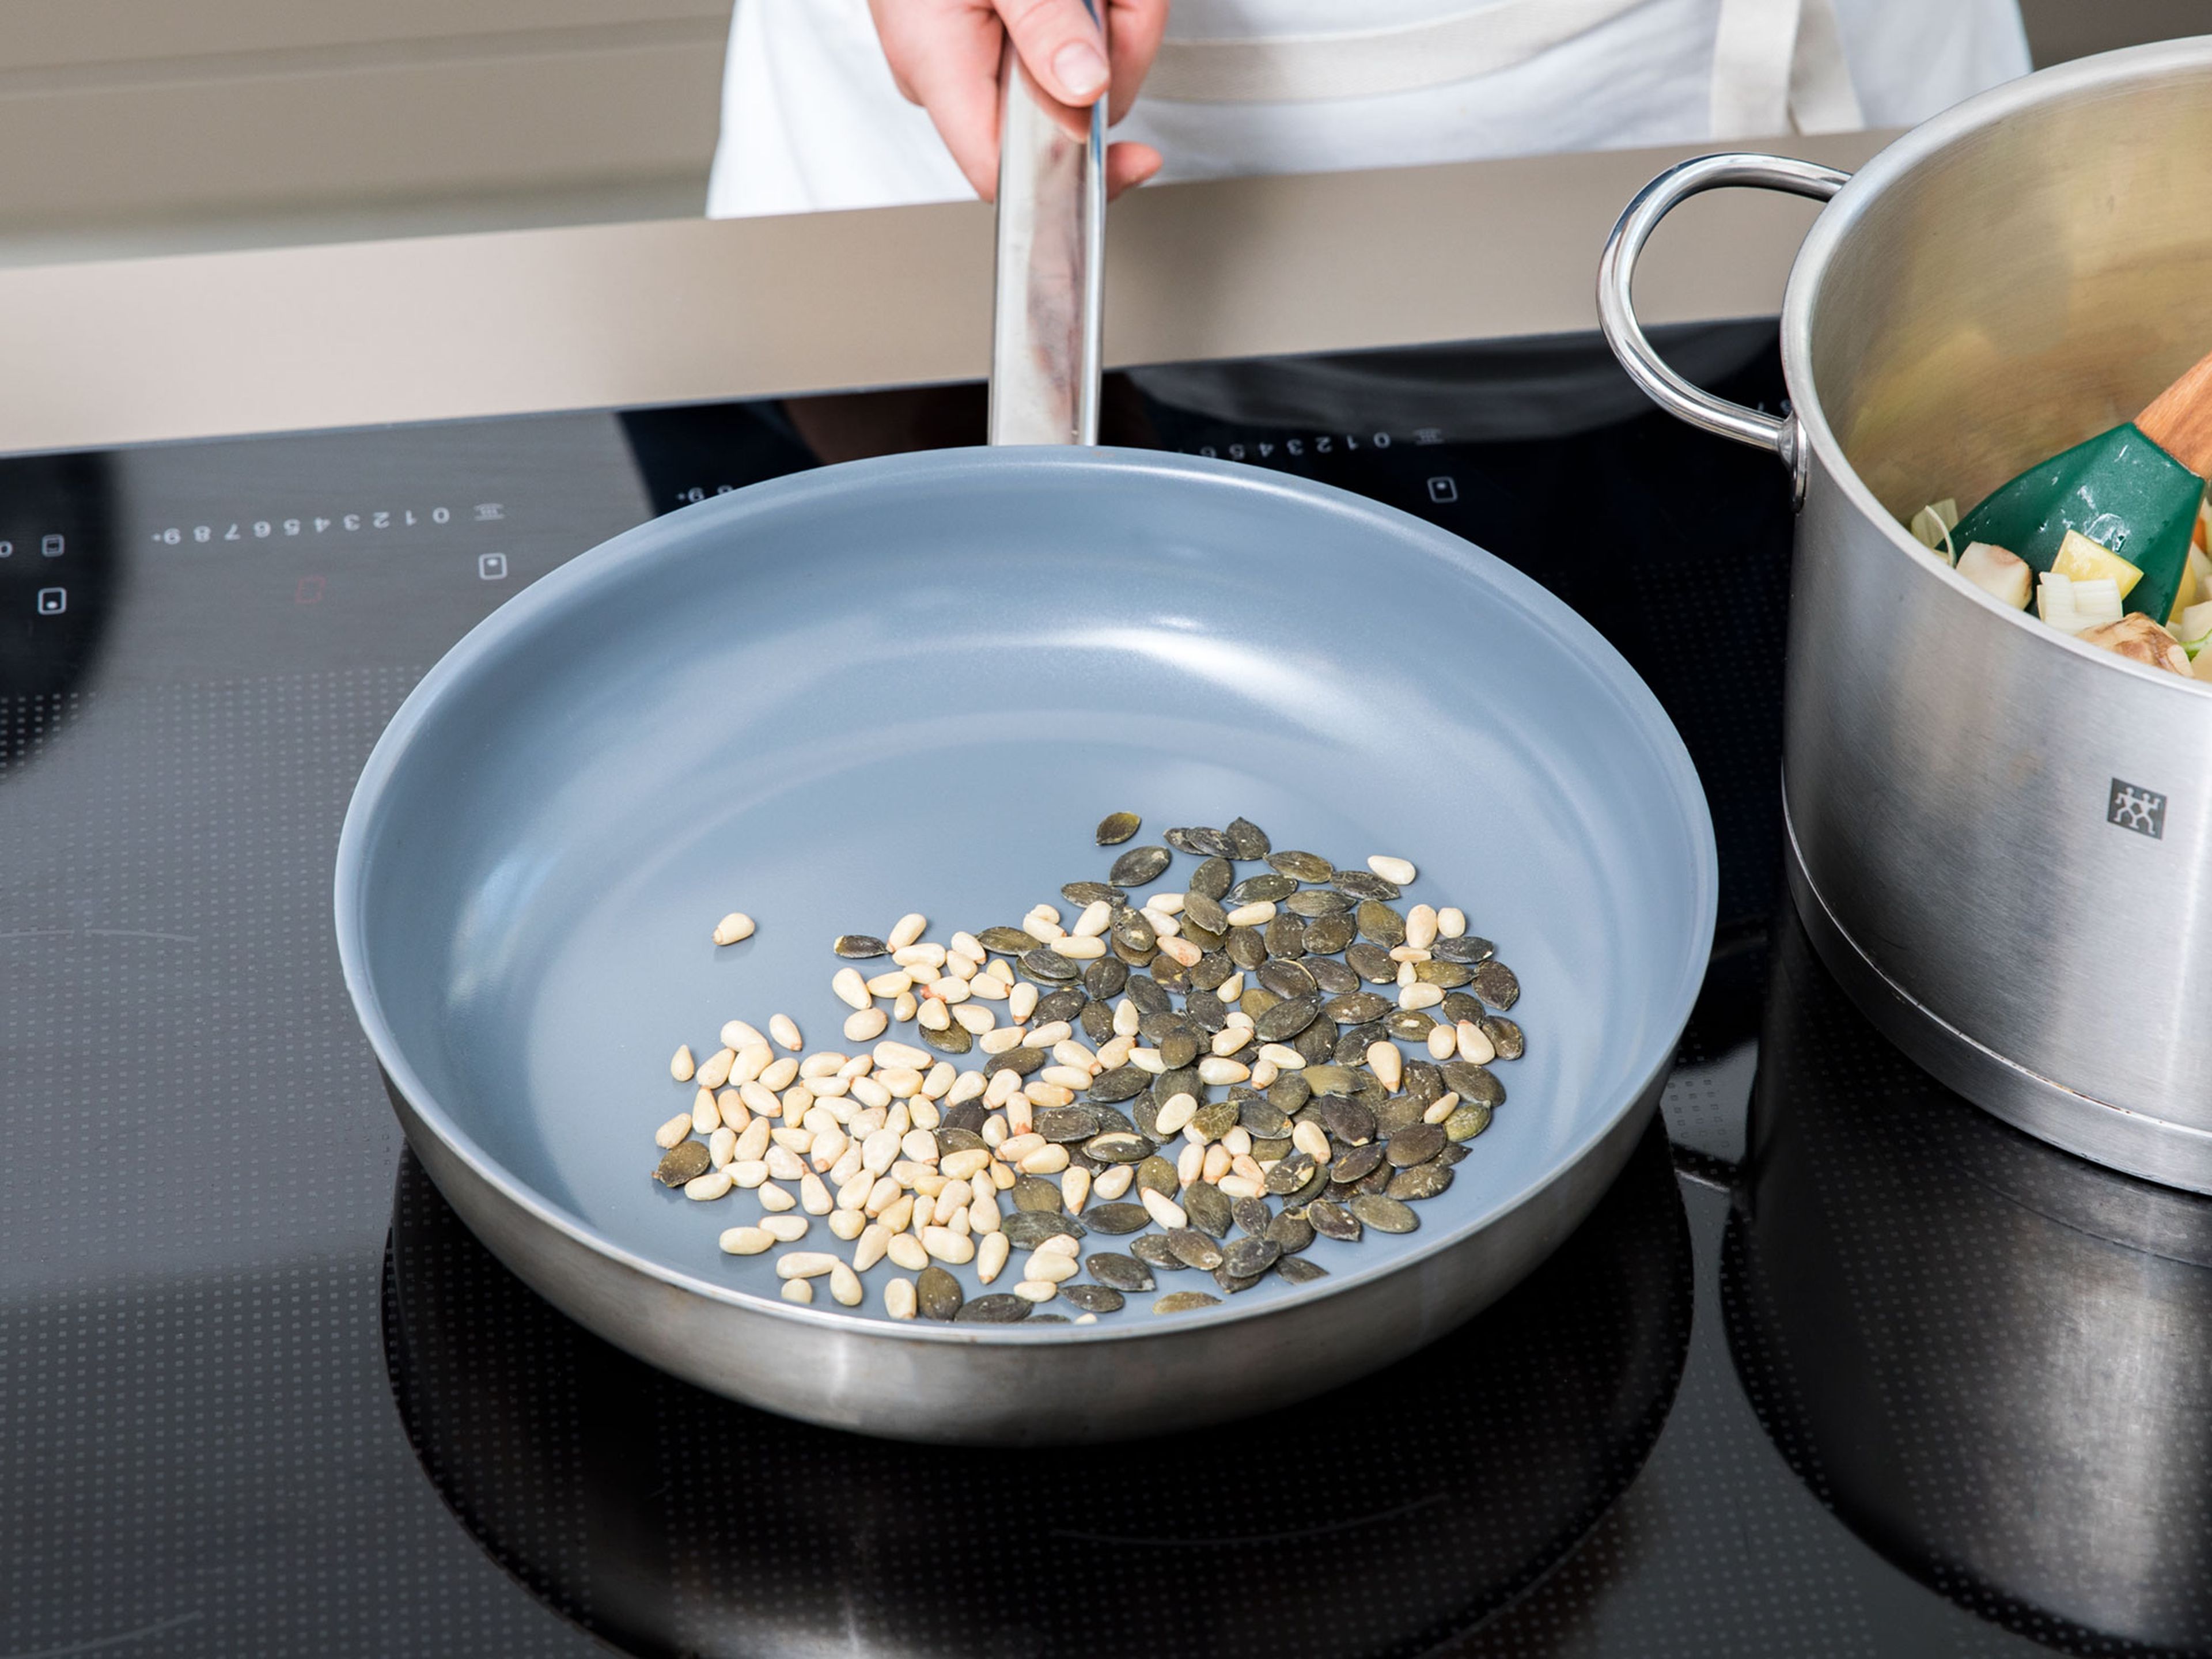 In the meantime, toast pine nuts and pumpkin seeds in a frying pan until they are nicely browned and fragrant. Remove the seeds from the pan and set aside.